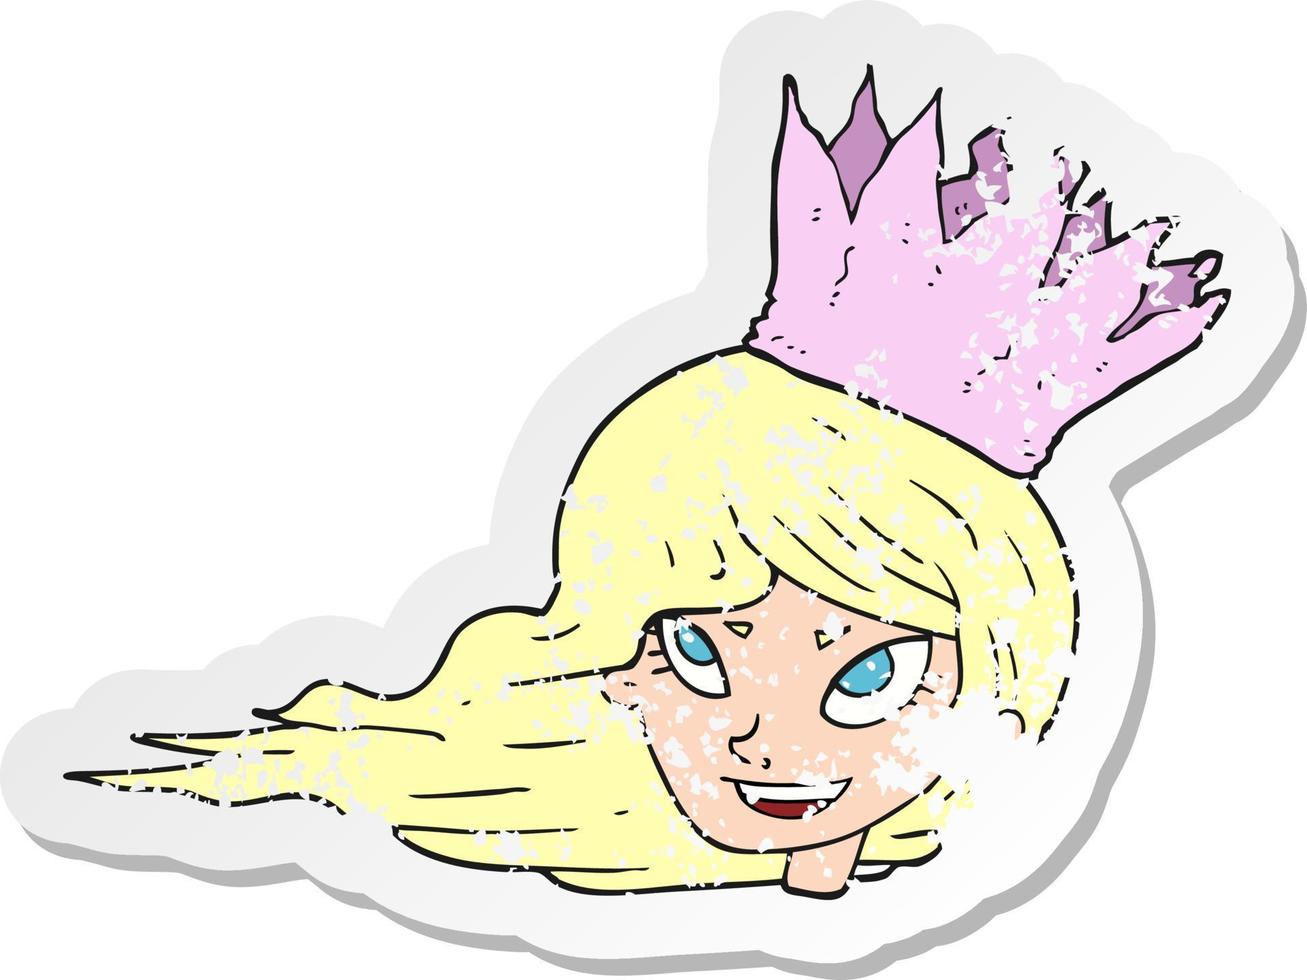 retro distressed sticker of a cartoon woman with blowing hair vector